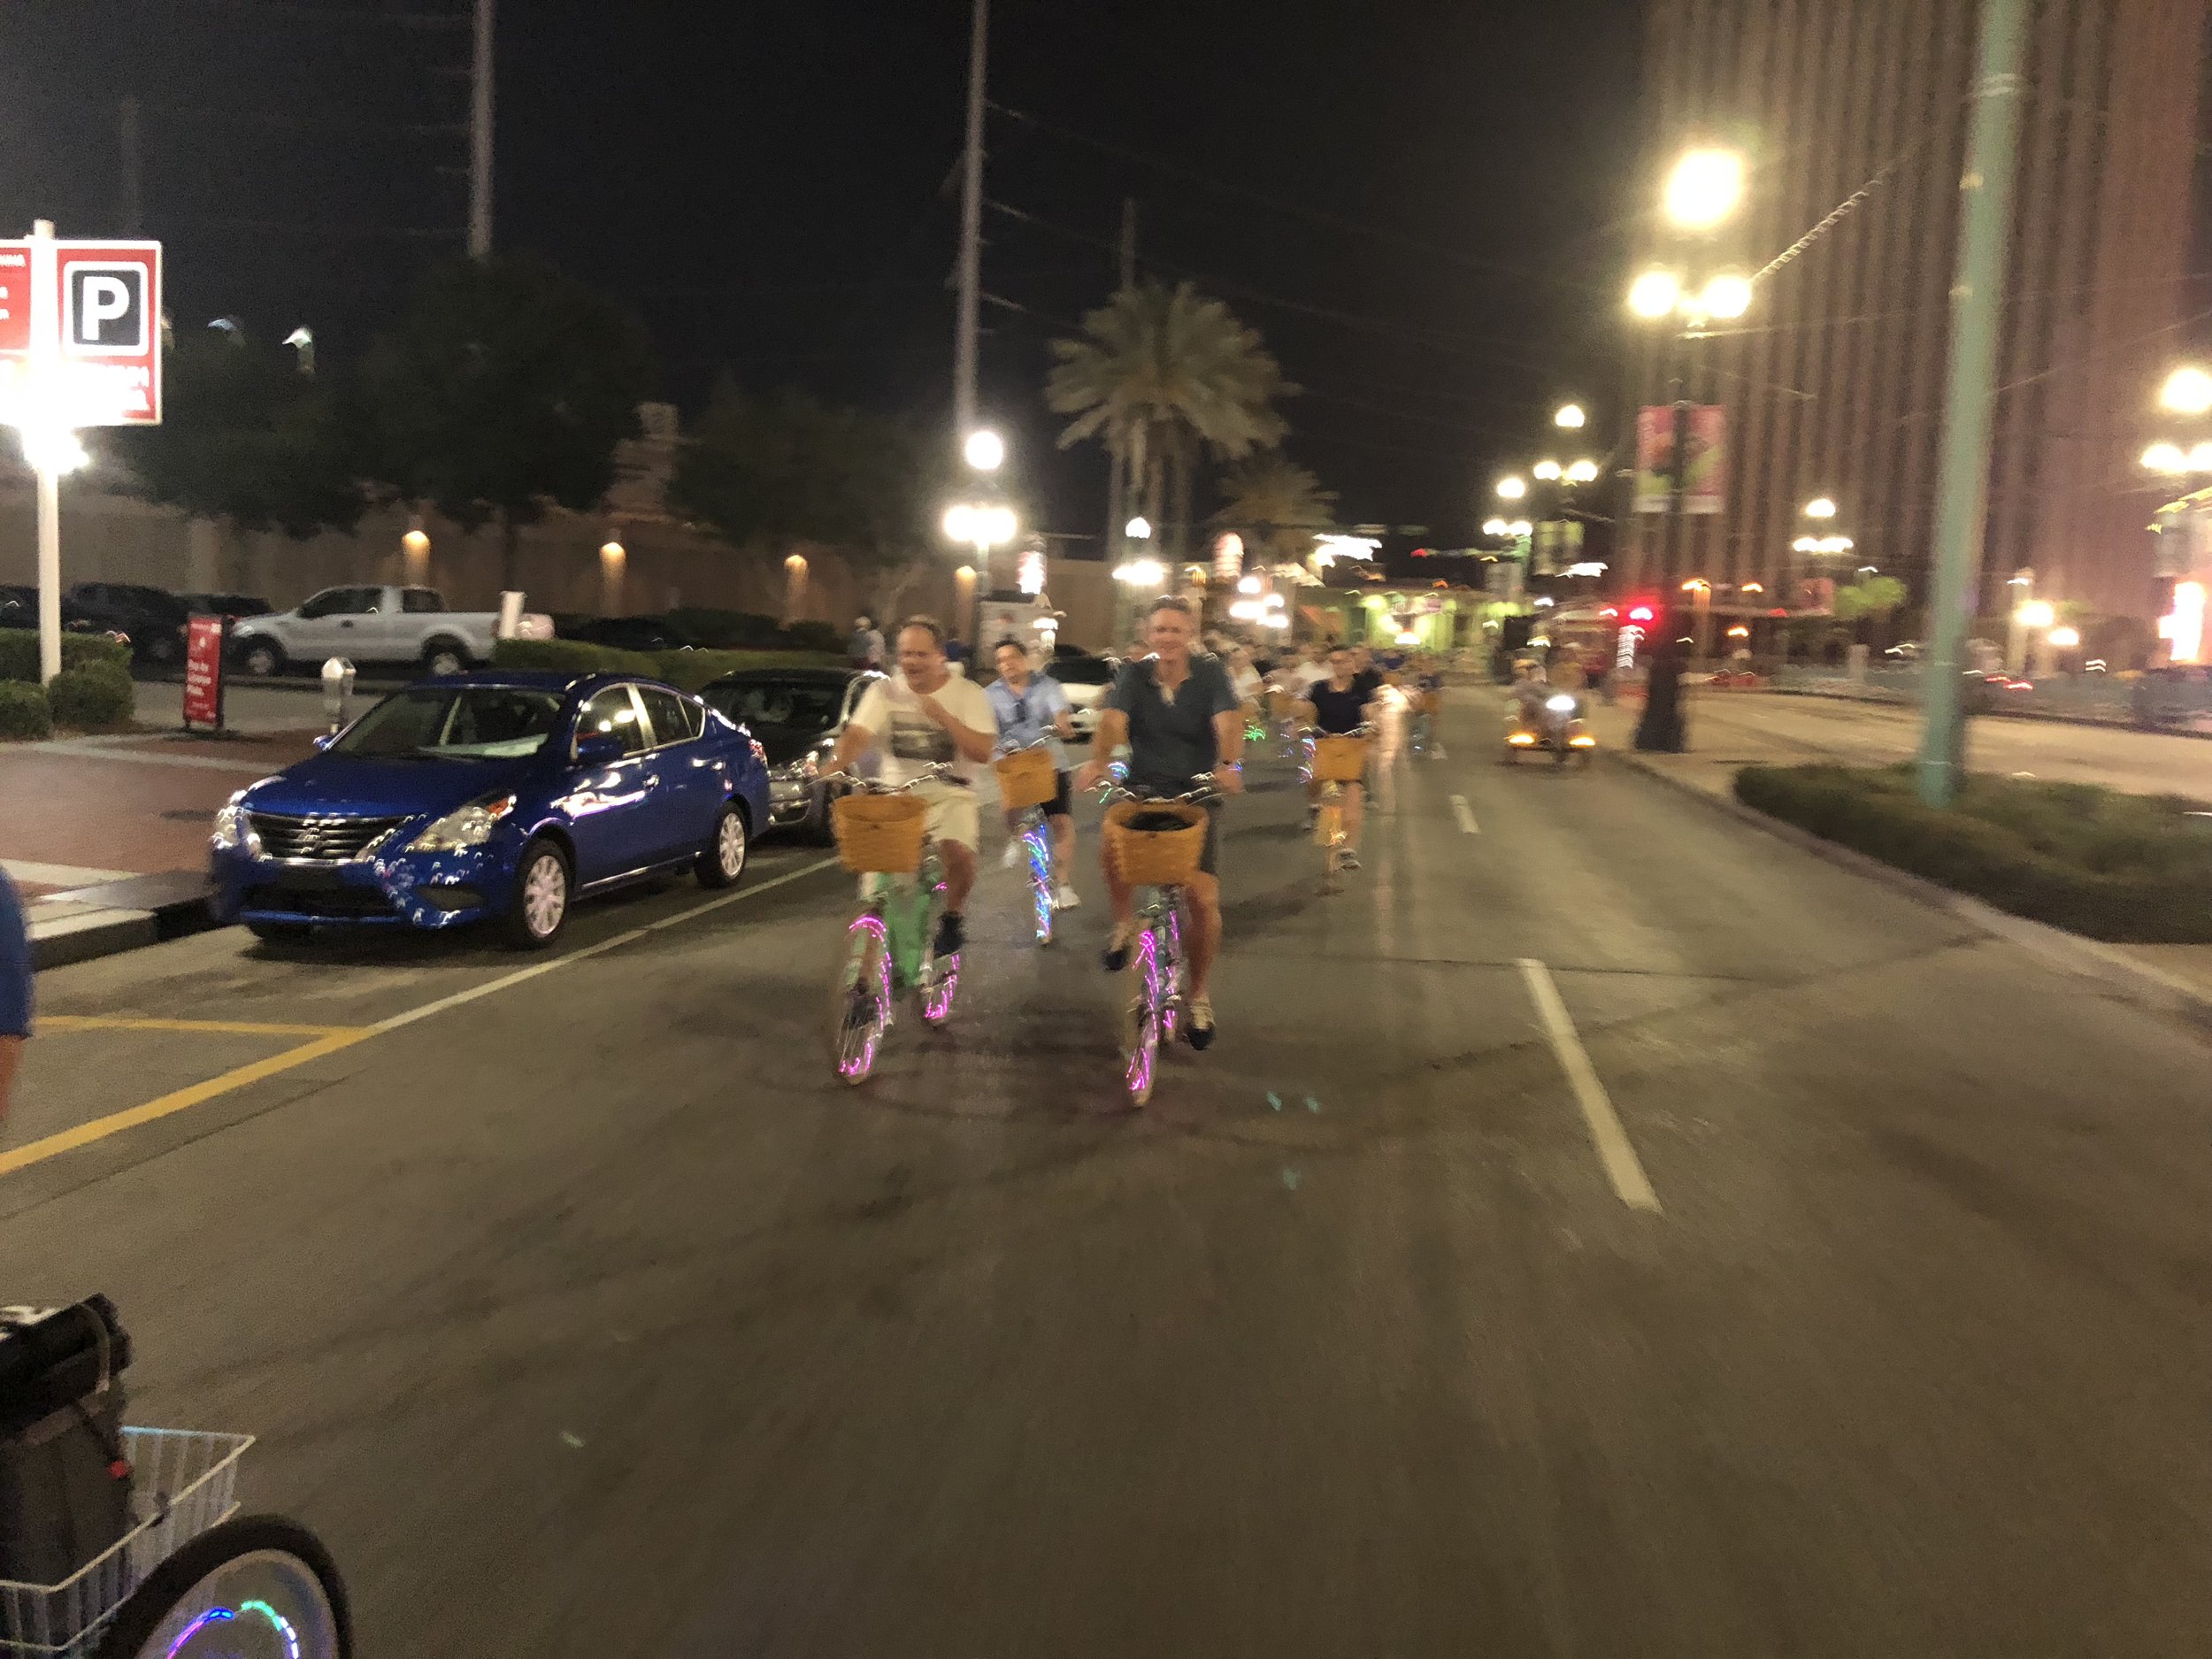  Our social ride is a party on two wheels. We offer the primer night ride of Nola. Be the lights of the city on our professionally maintained bikes. Our wheels are blinged out with lights and we have amplified music to boot. Don’t miss out on this am